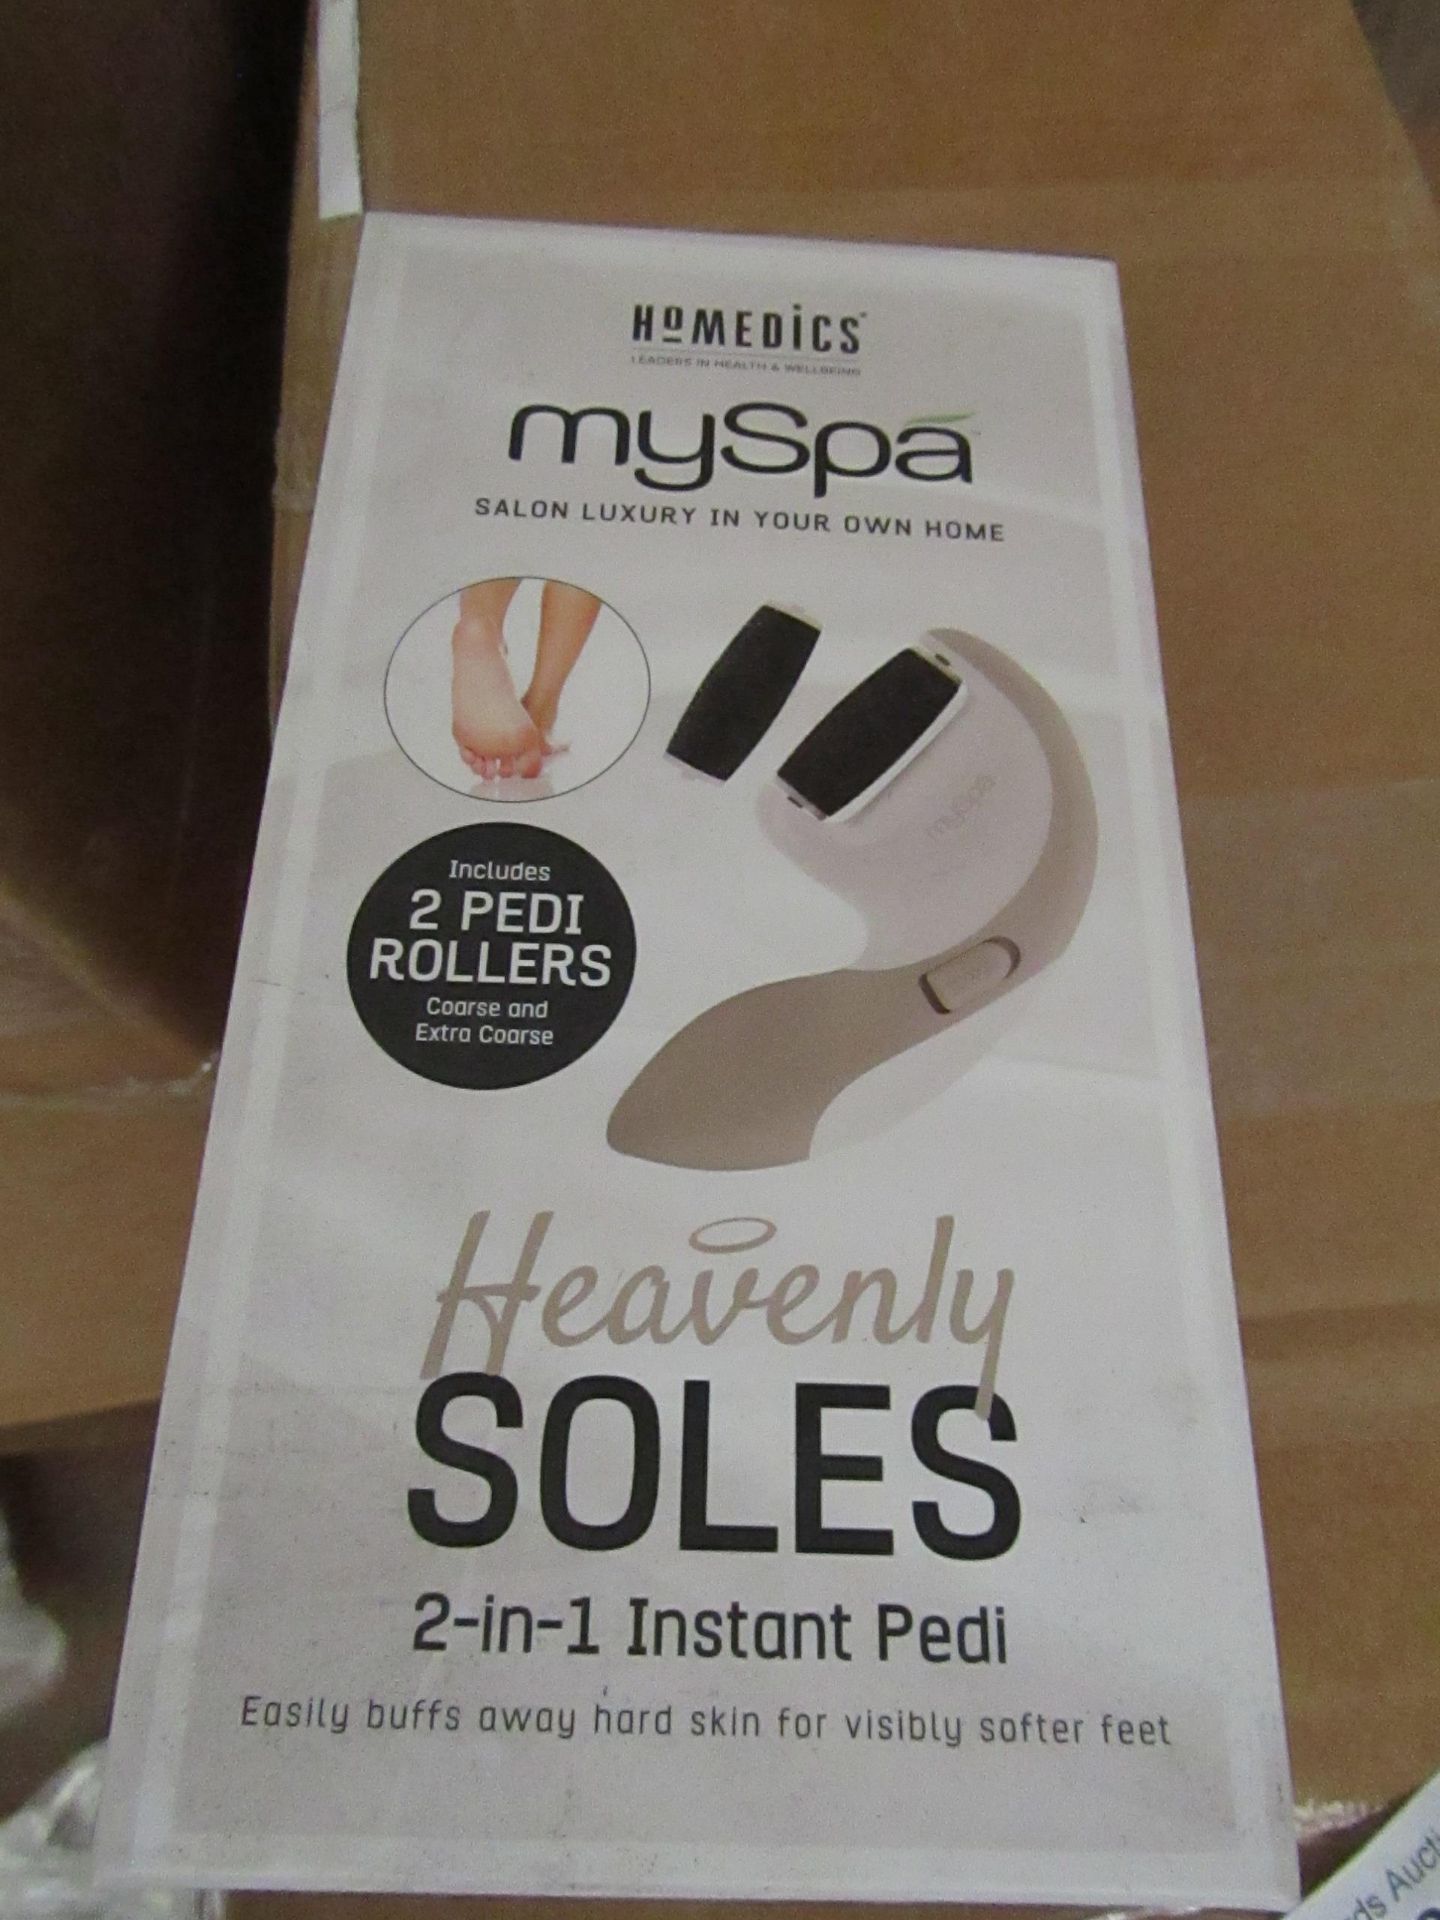 2x Homedics My Spa Heavenly soles 2 in 1 instant pedi, unused and boxed